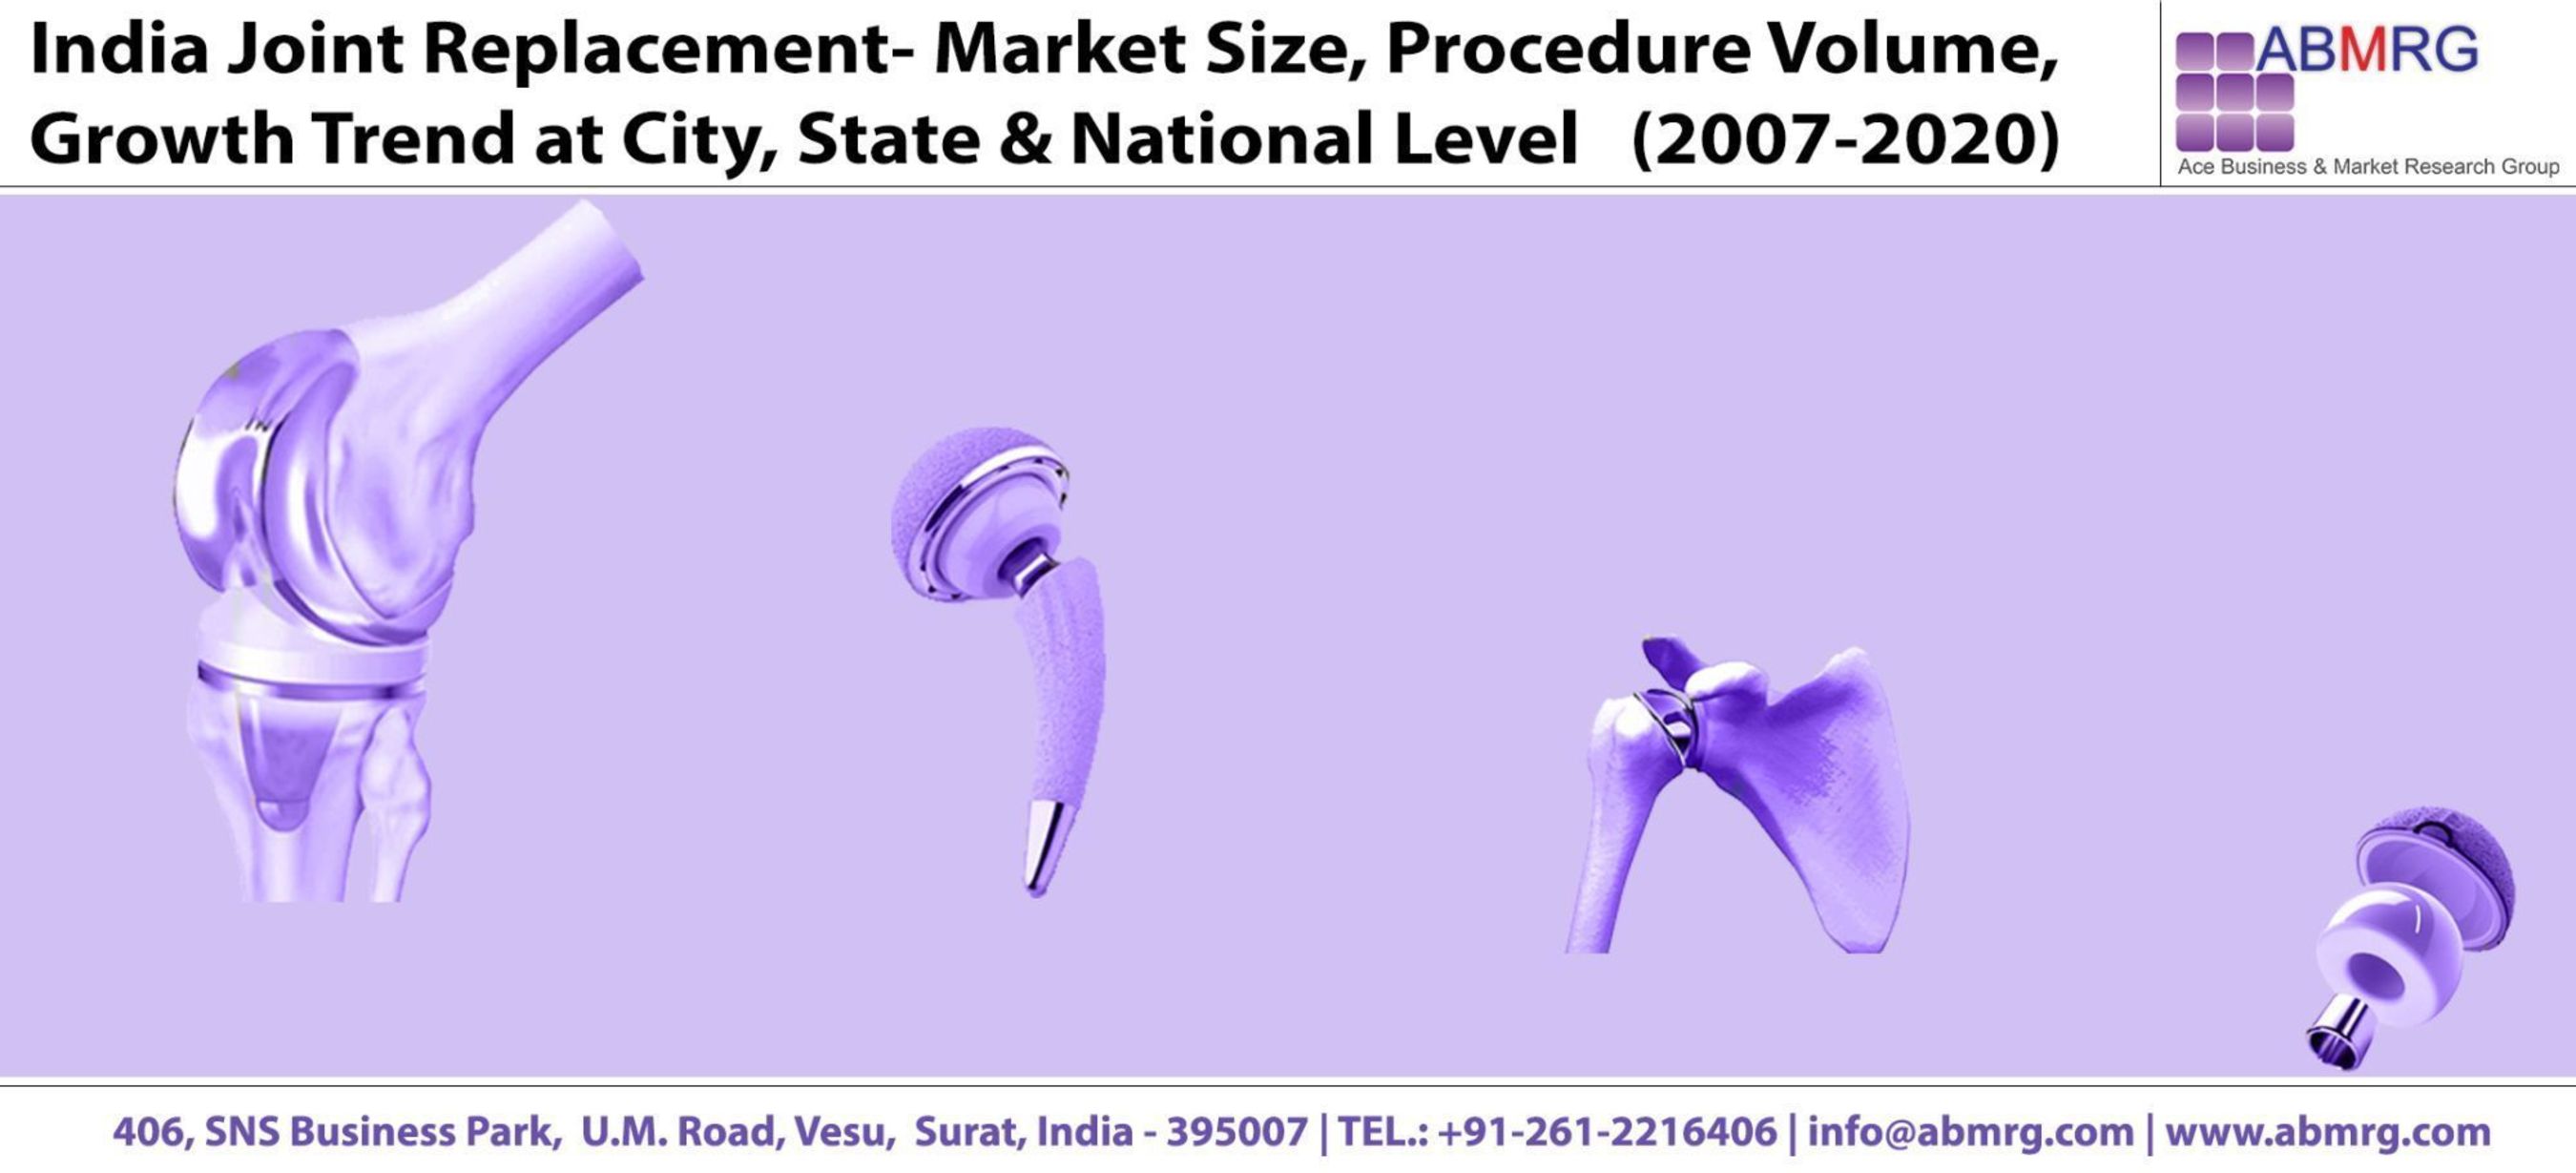 India Joint Replacement - Market Size, Procedure Volume, Growth Trend at City, State and National Level (PRNewsFoto/ABMRG)